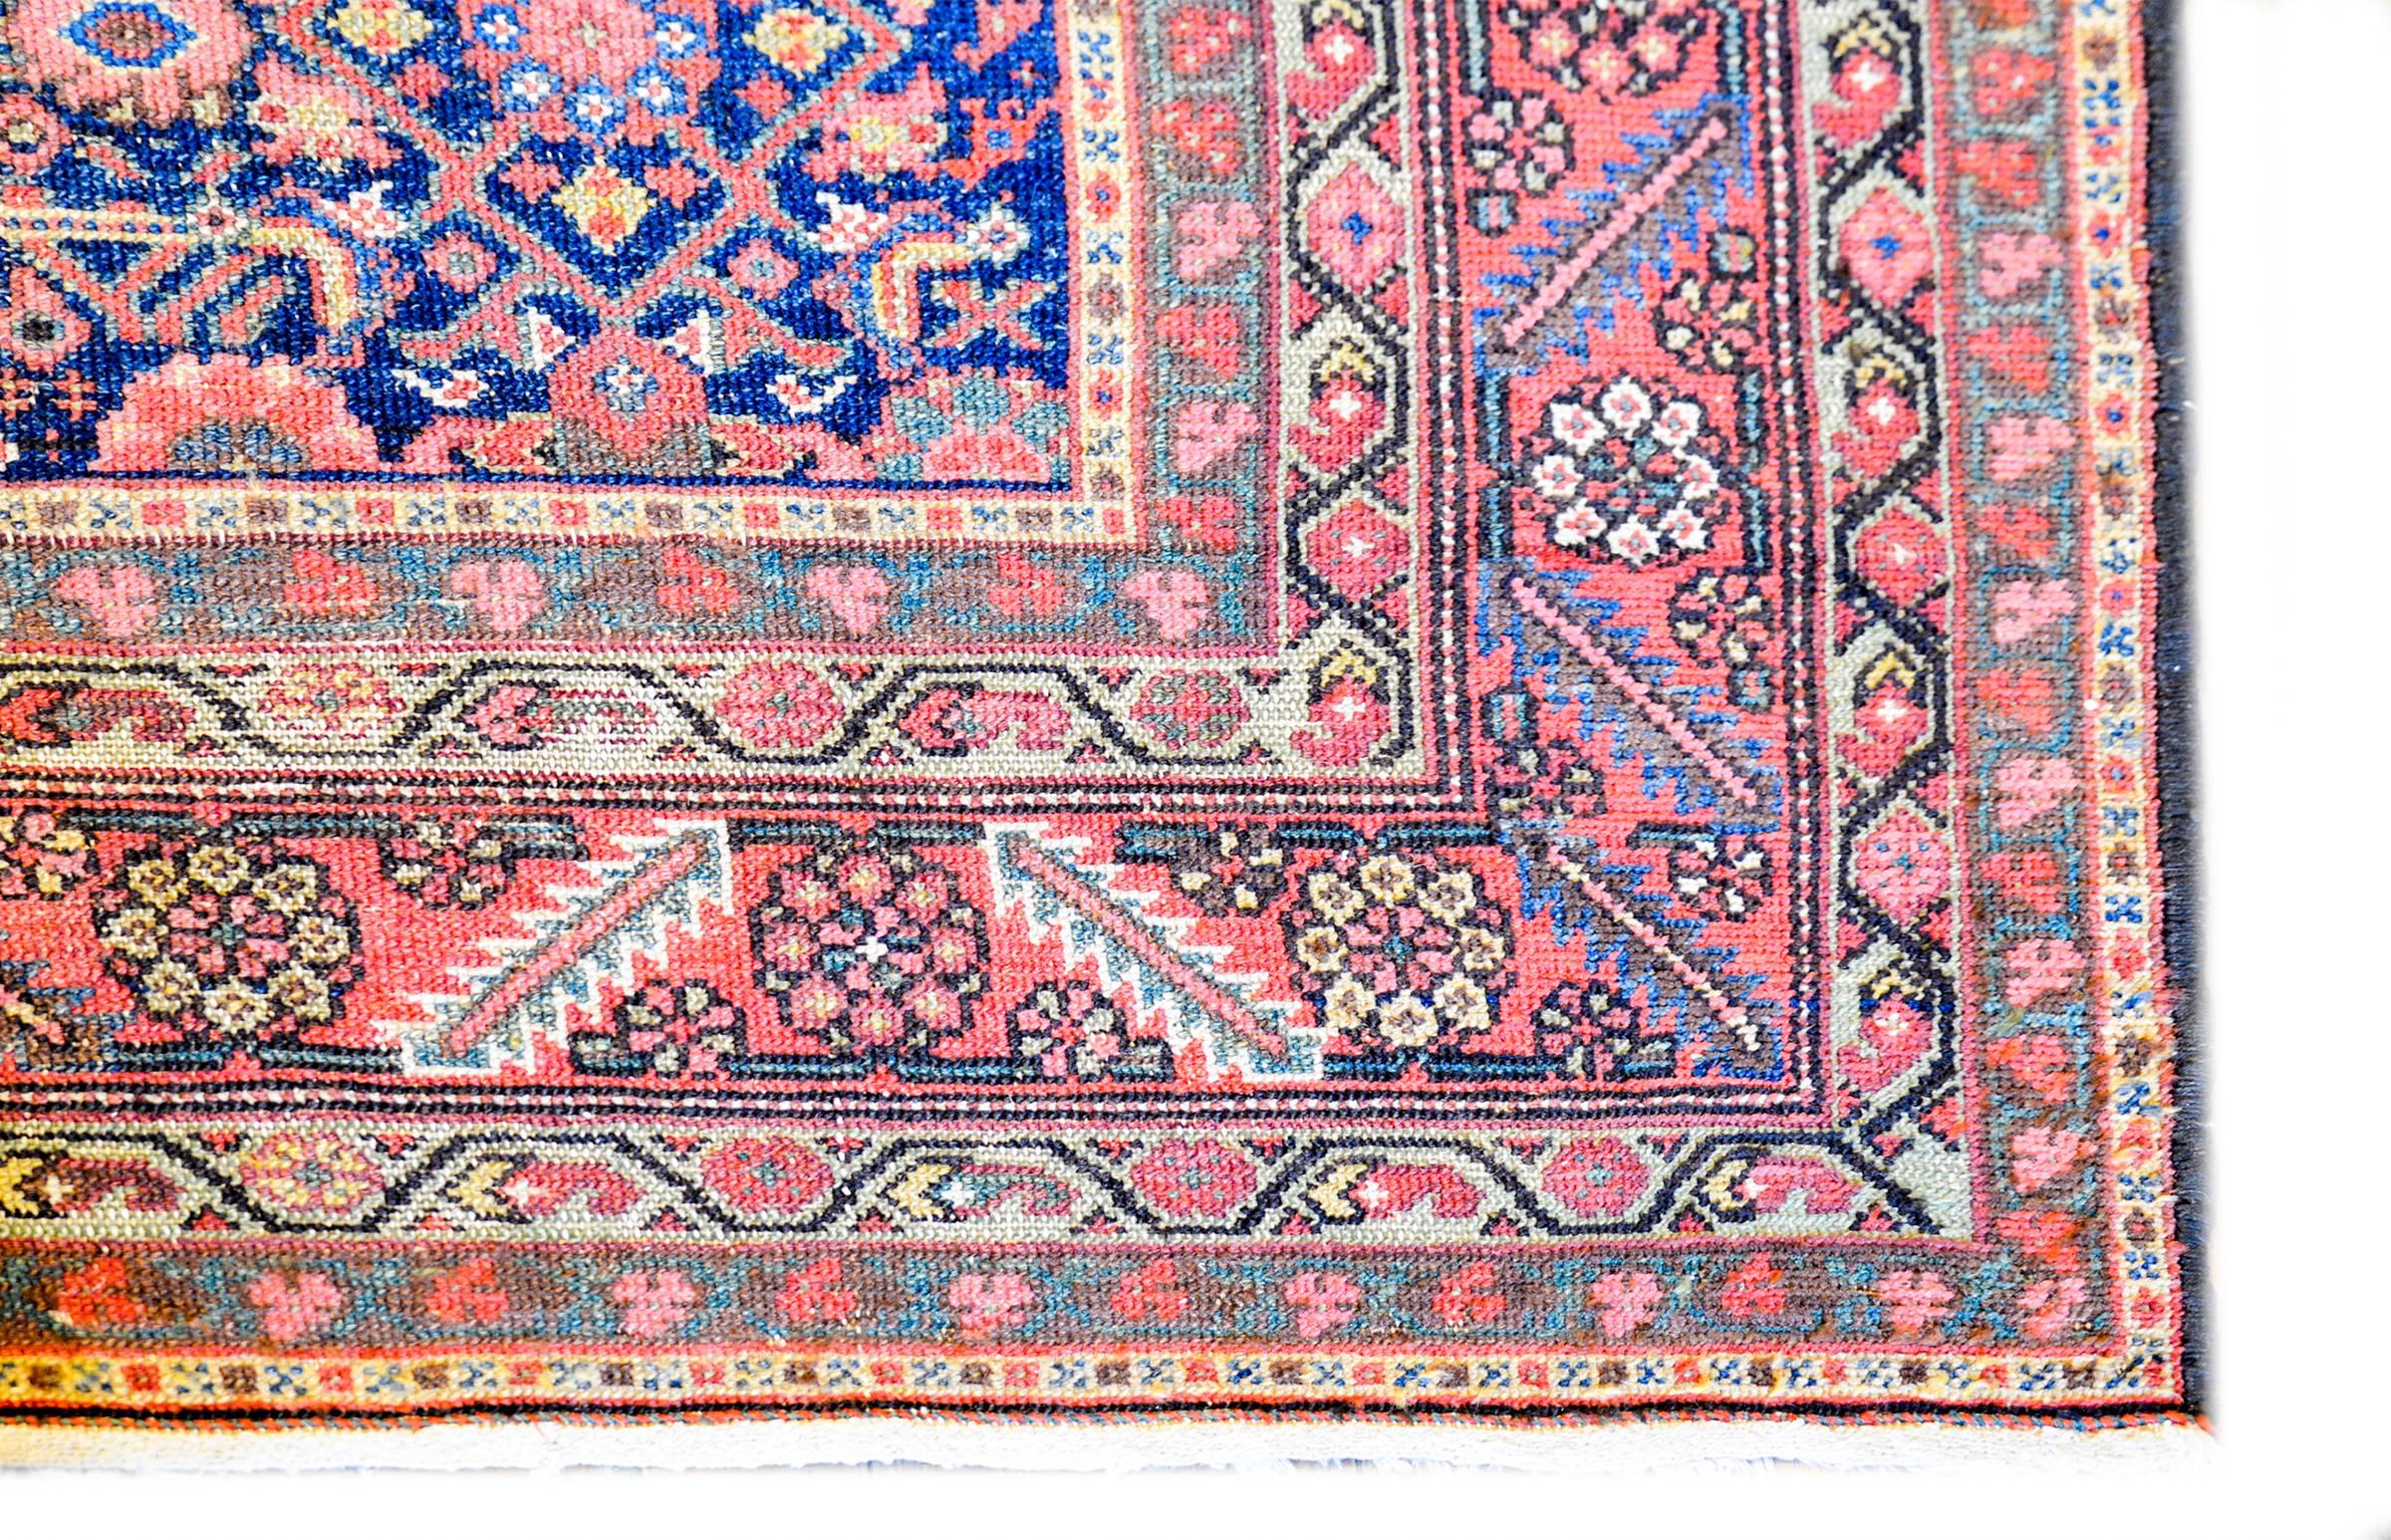 Malayer Exceptional Early 20th Century Malayar Herati Rug For Sale